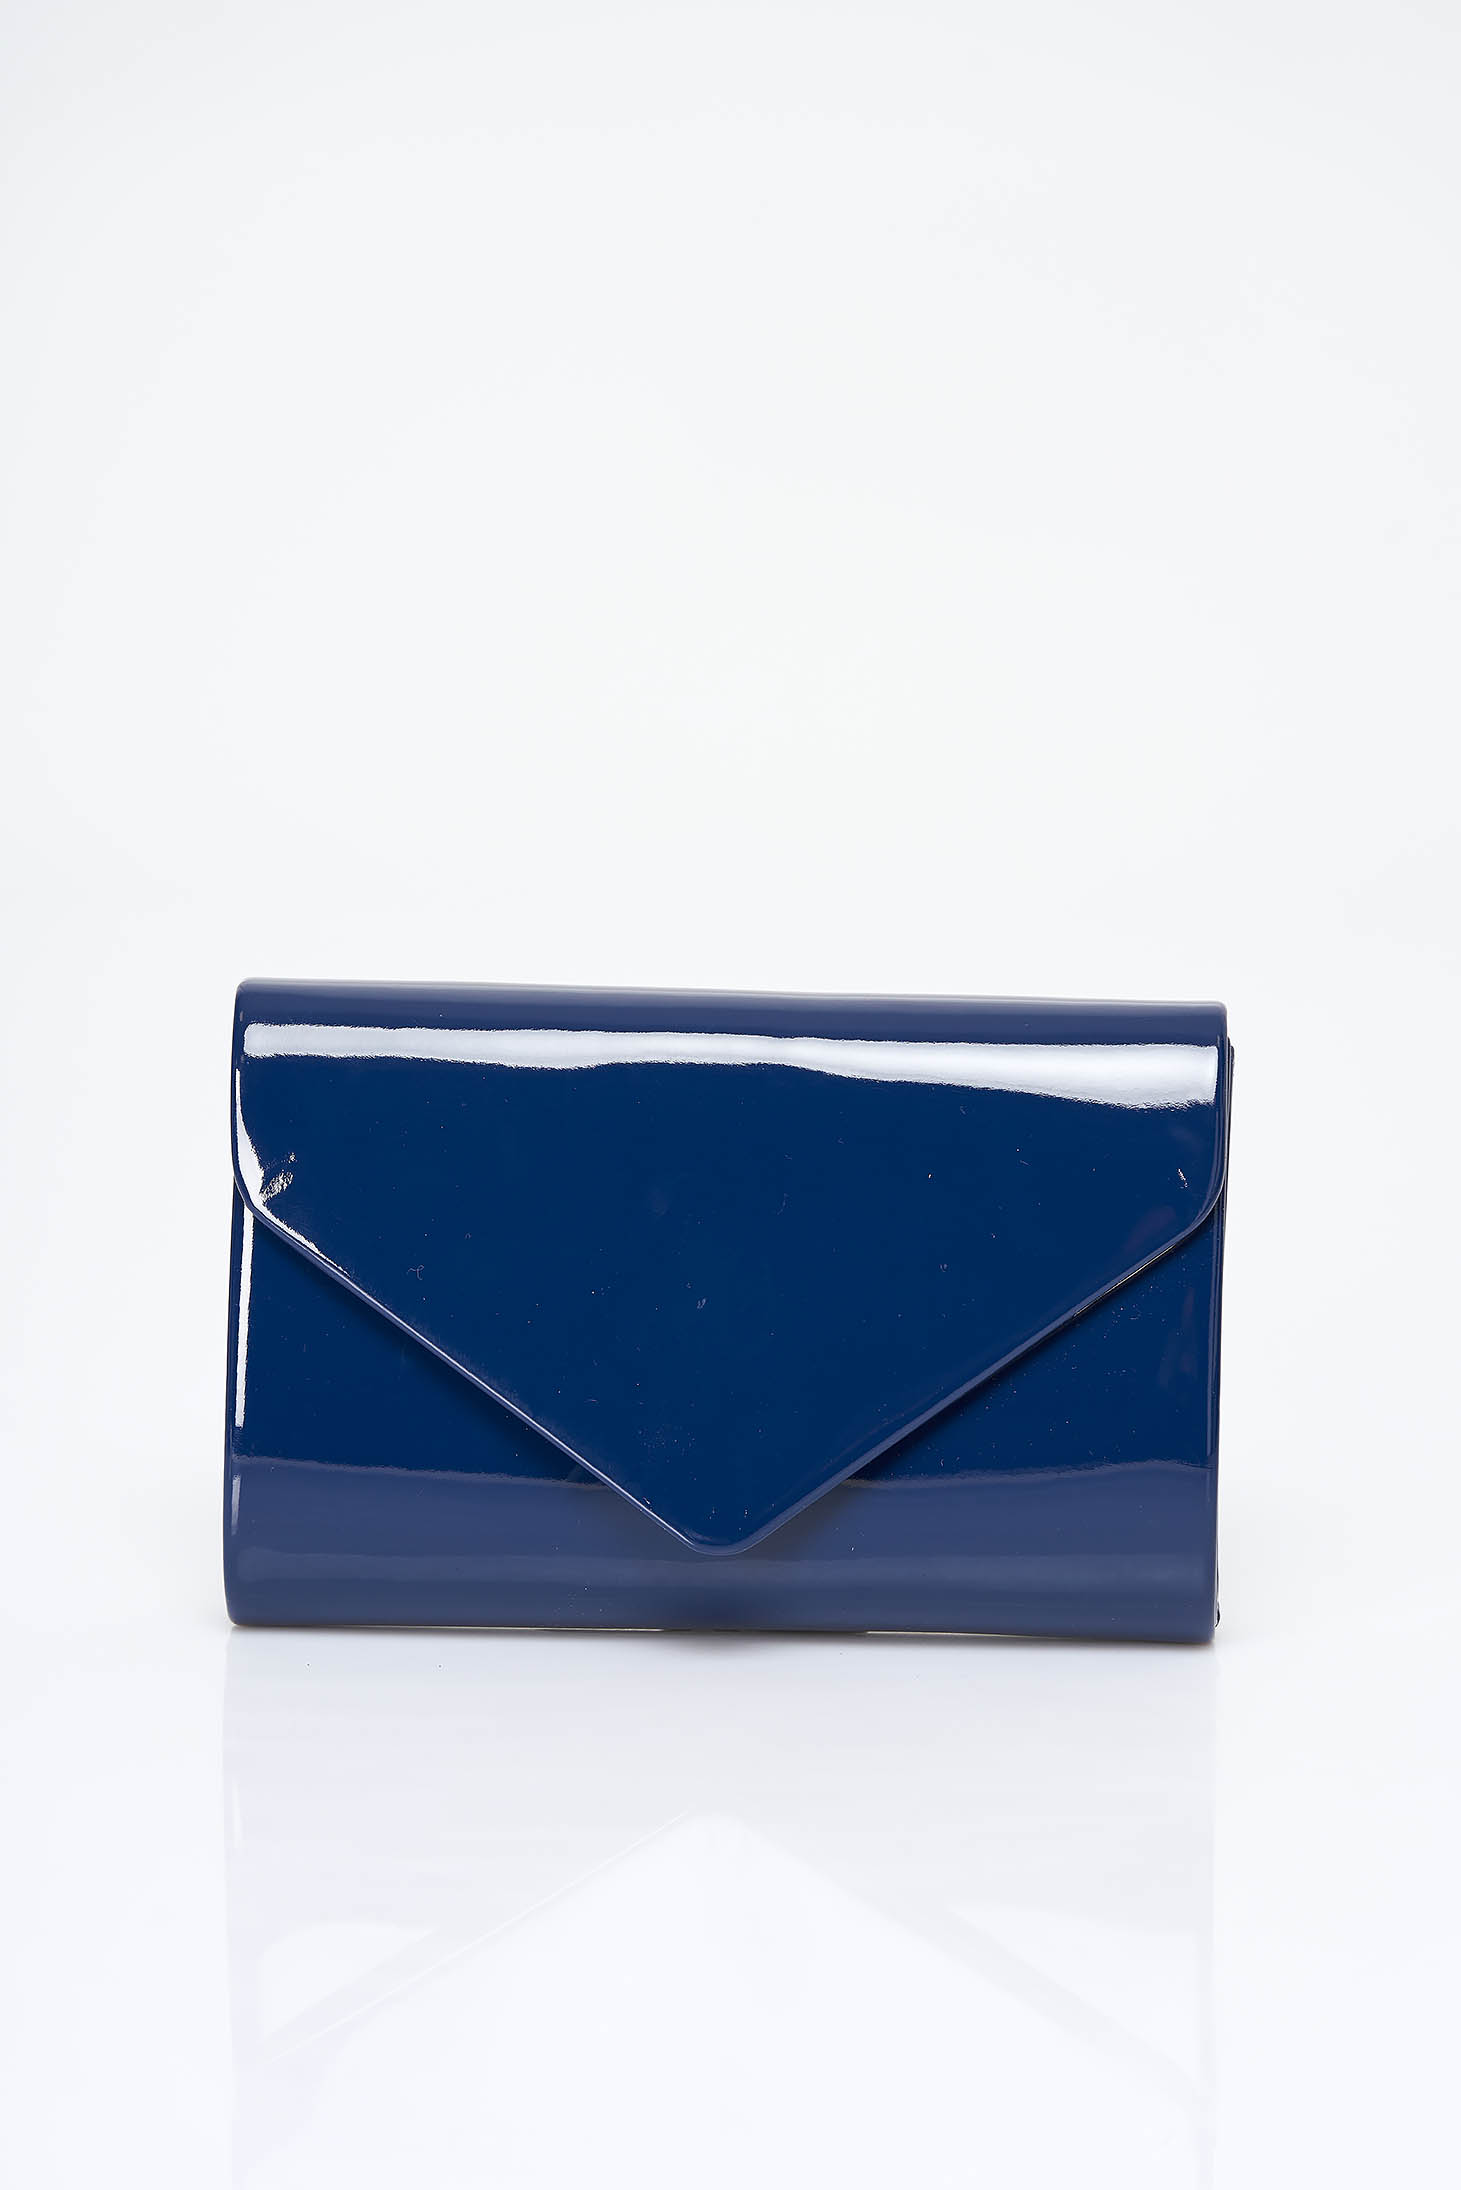 Navy Blue Clutch Bag for Women Made from Lacquered Faux Leather 2 - StarShinerS.com